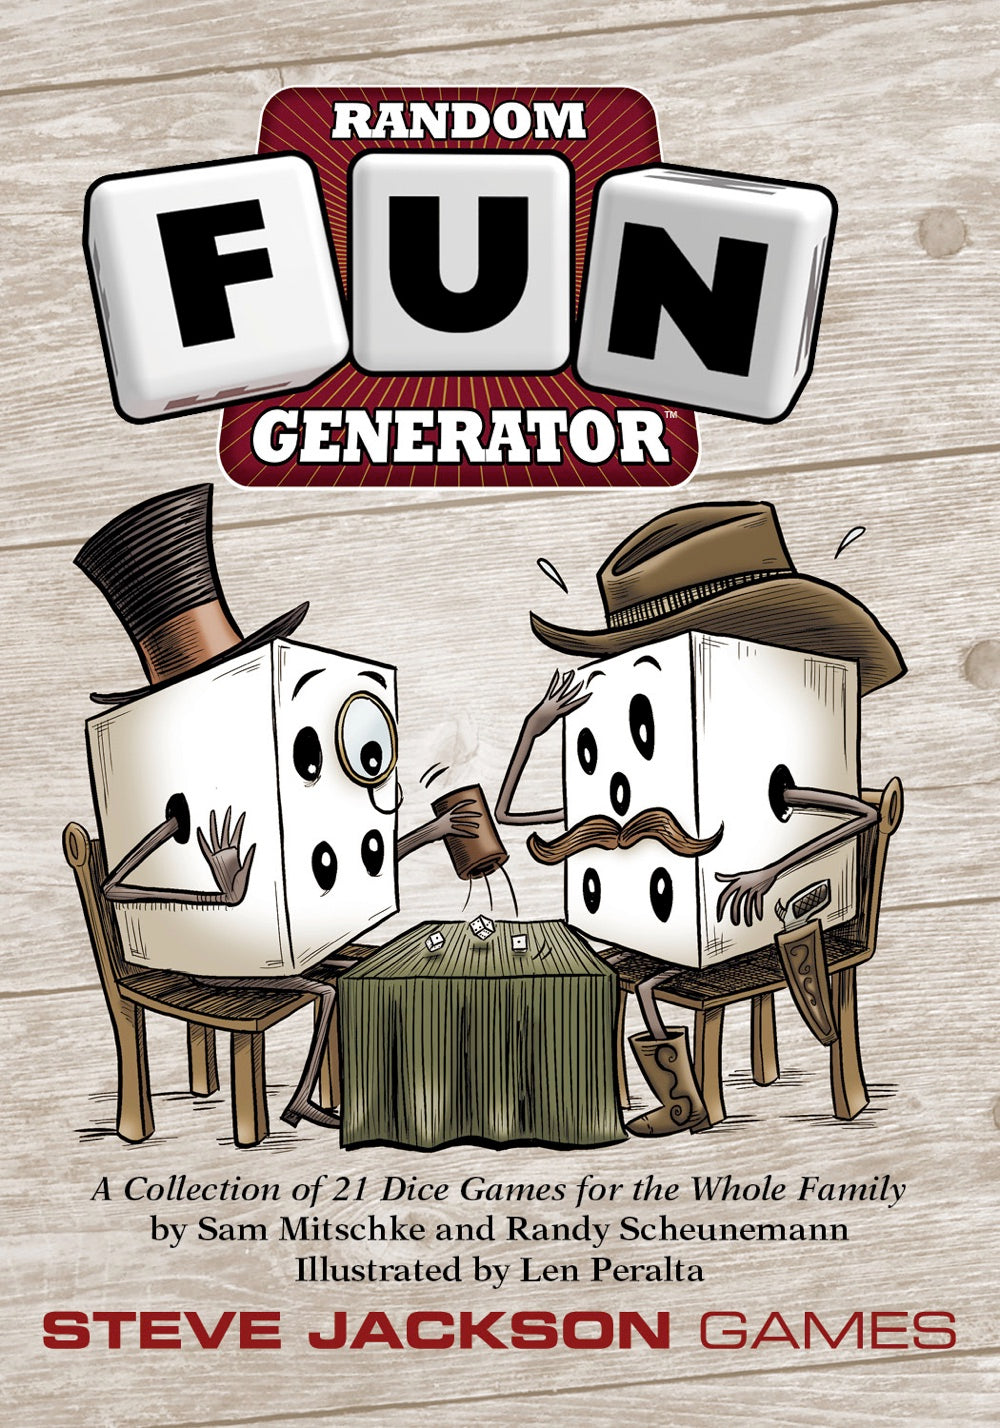 Random Fun Generator - A Collection of Dice Games (2nd Edition)